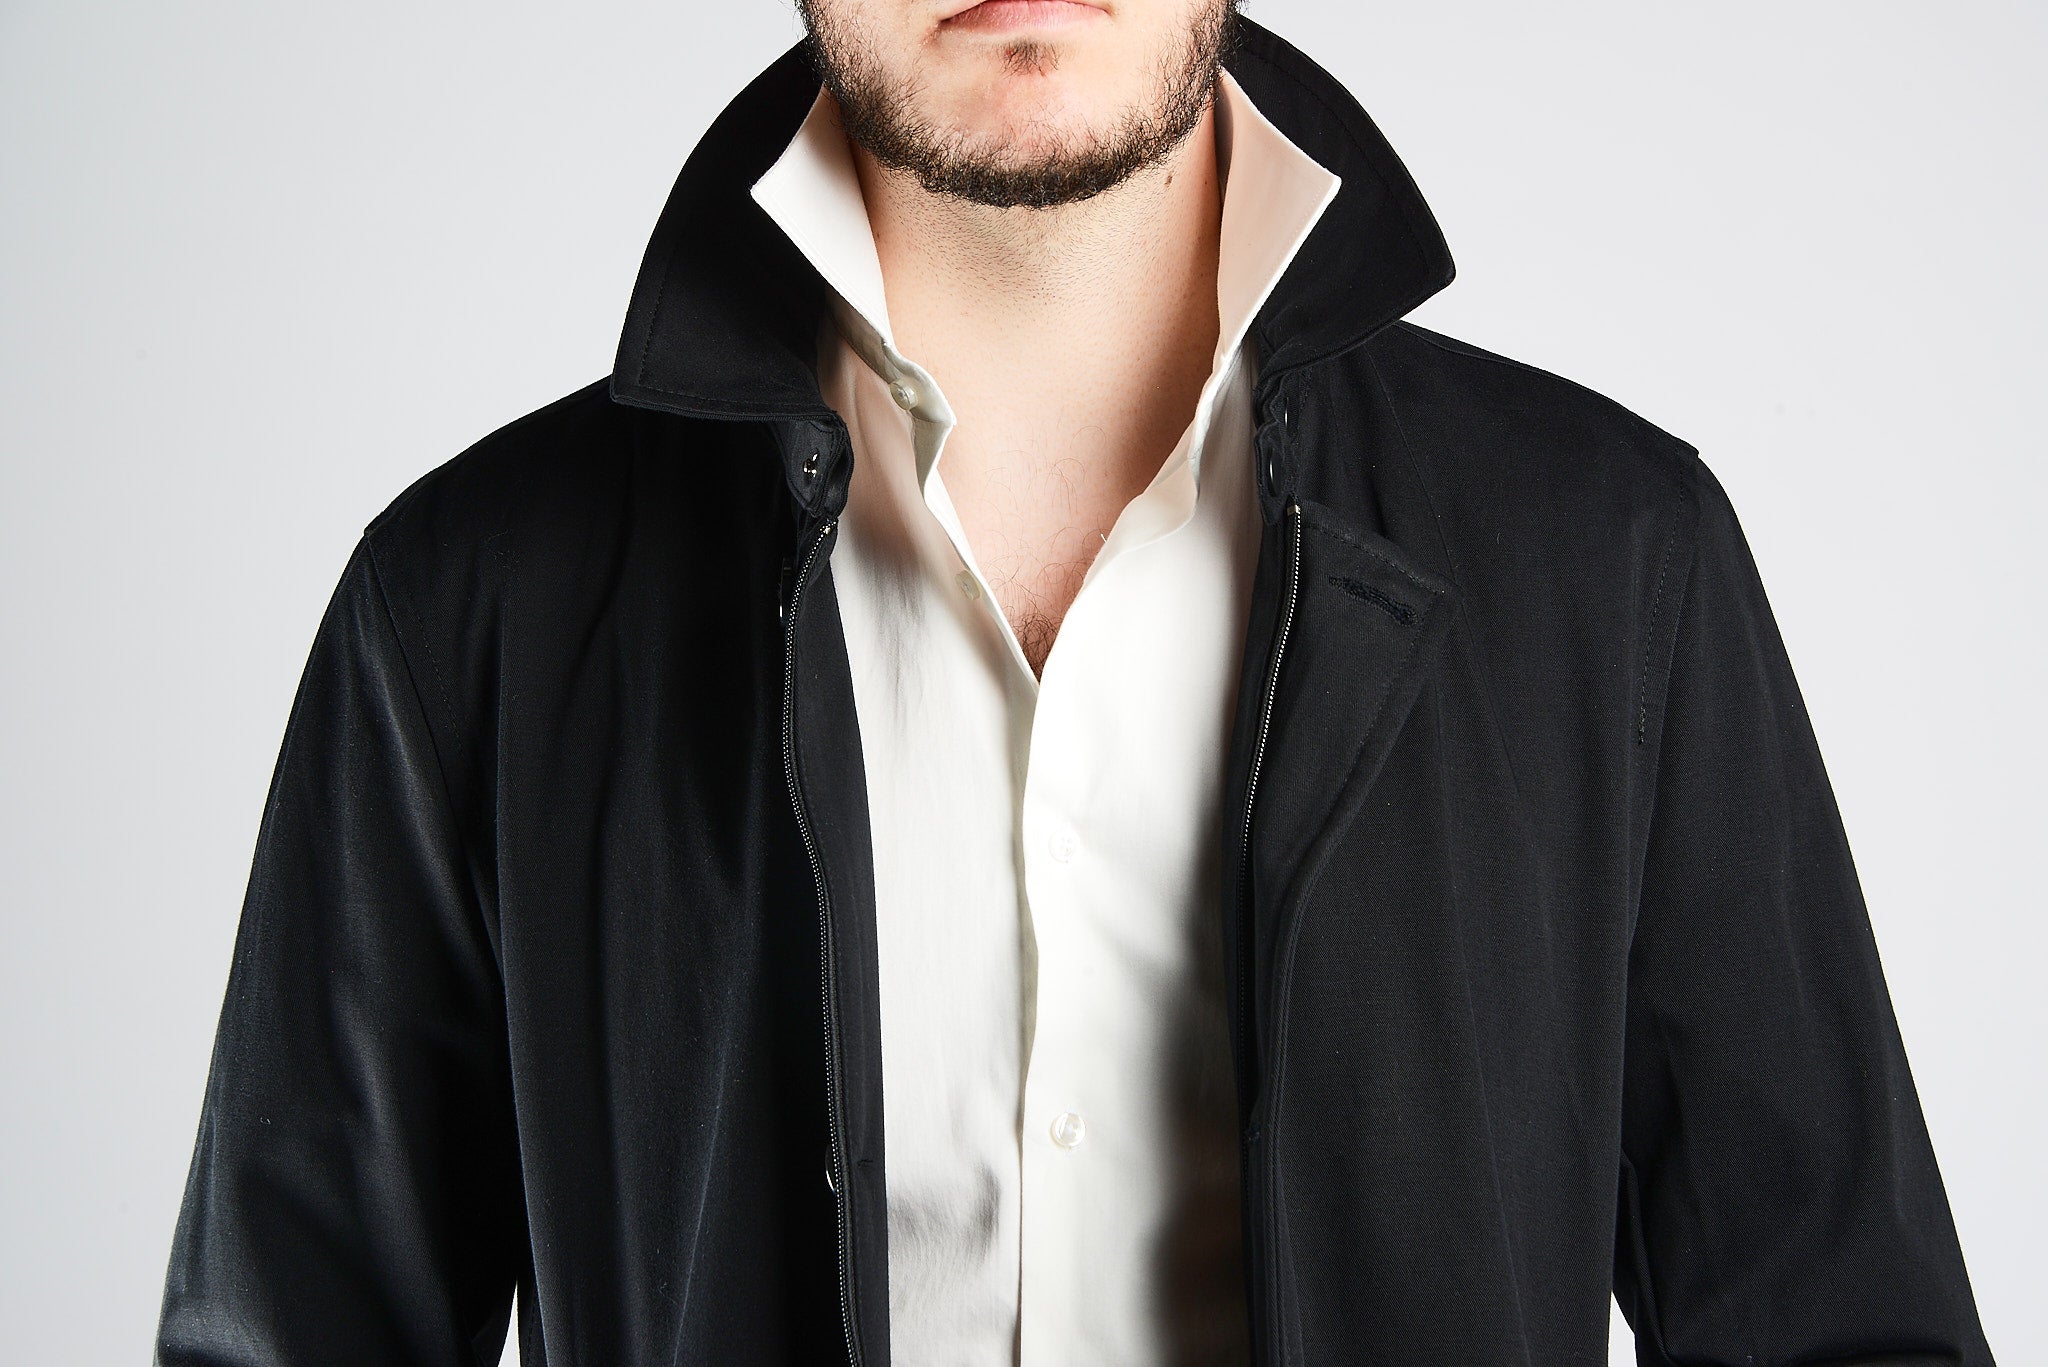 Euro Casual Lightweight Trench Coat